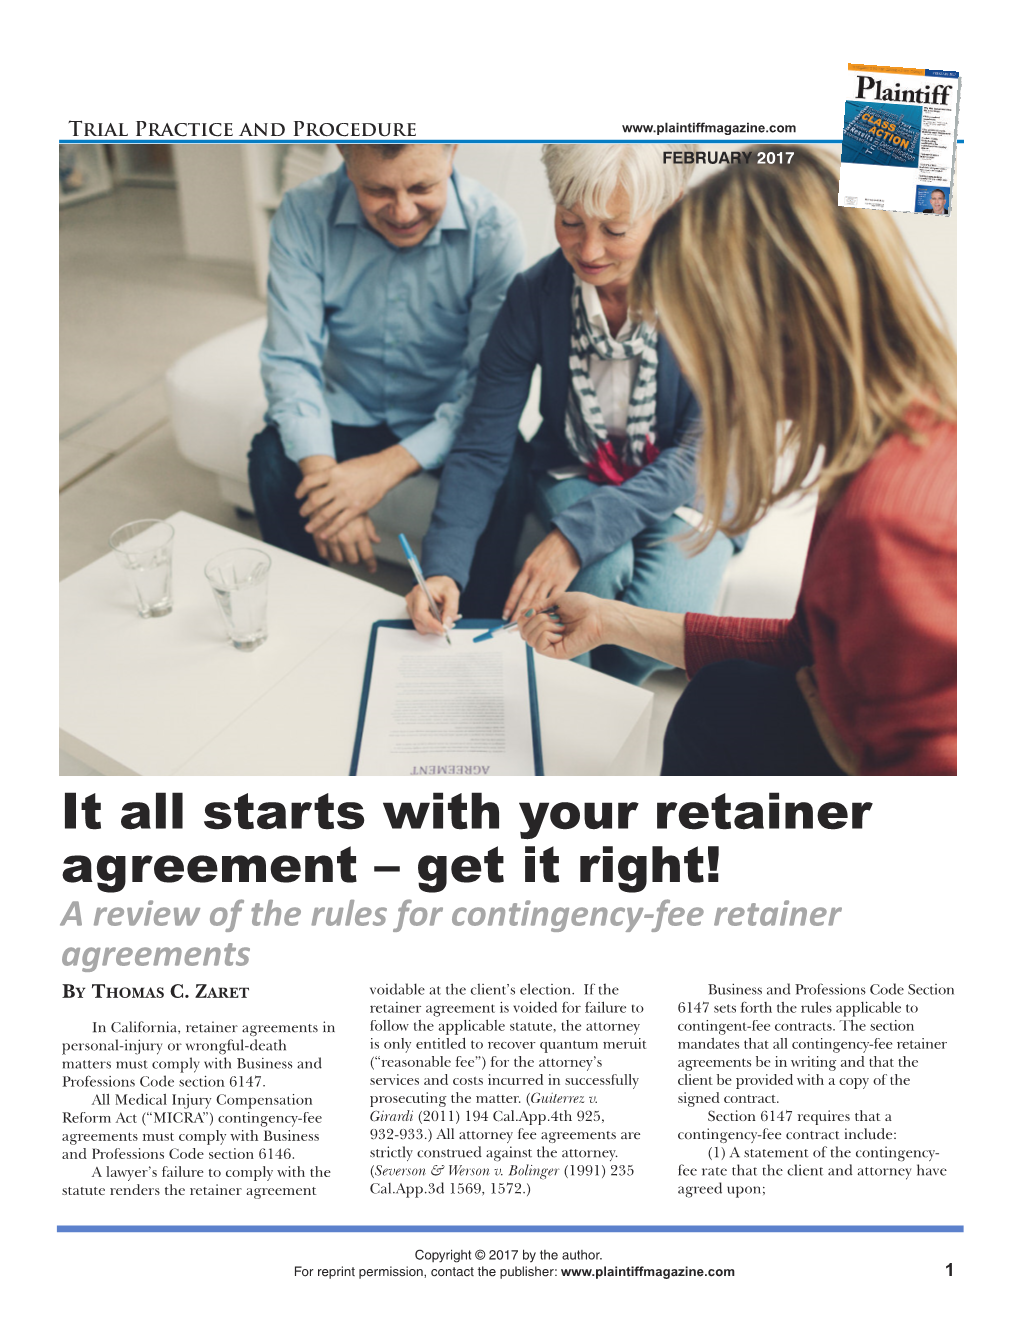 It All Starts with Your Retainer Agreement – Get It Right! Plaintiff Magazine